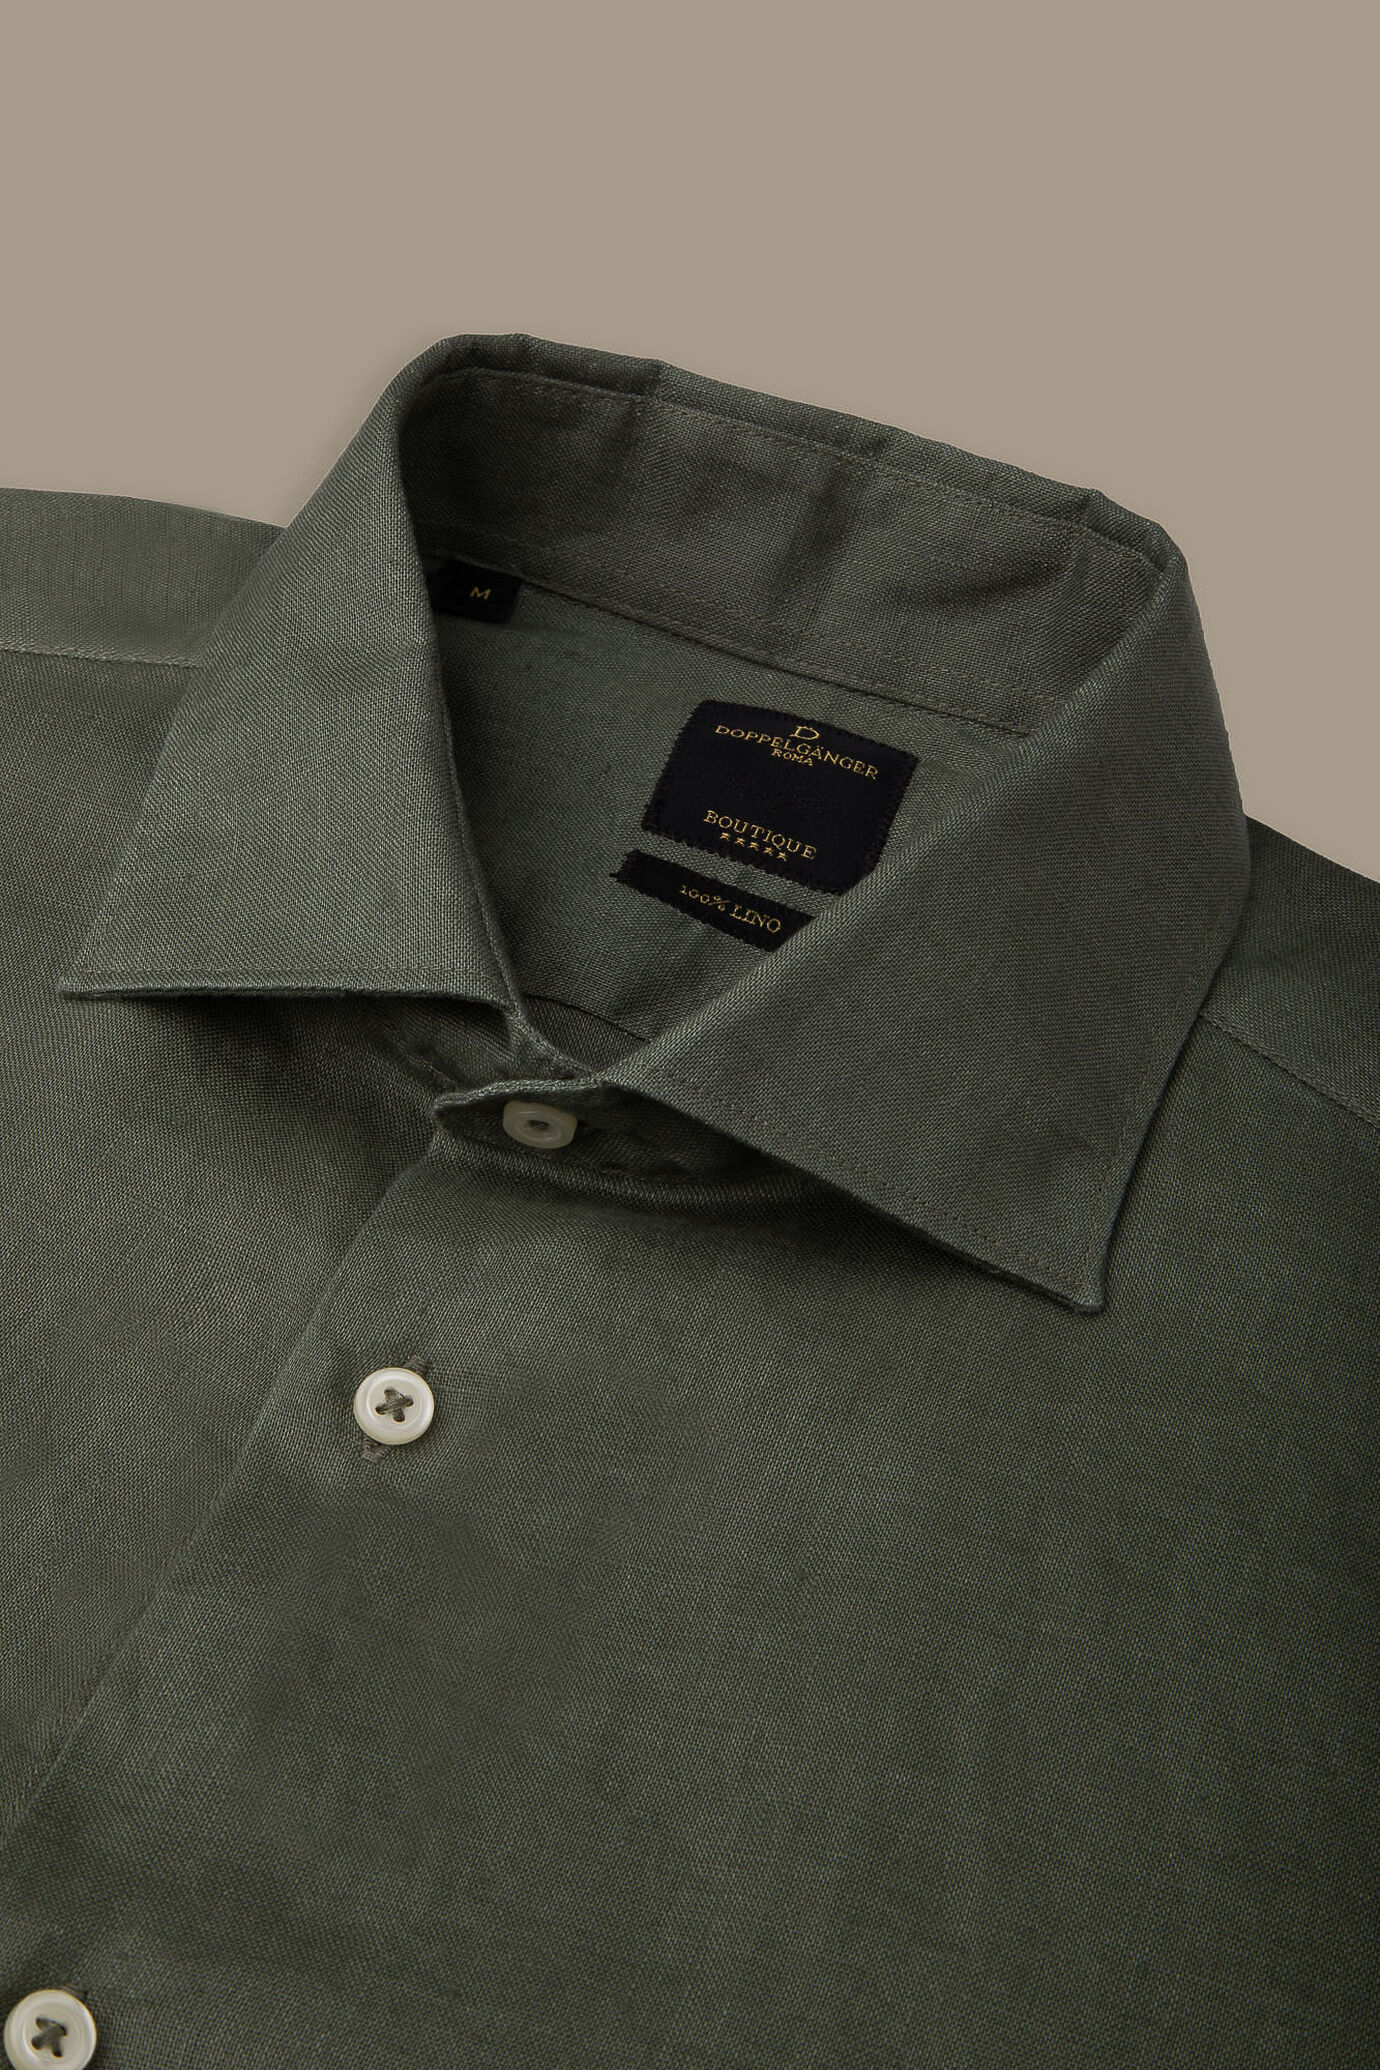 100% linen casual shirt french collar image number 3